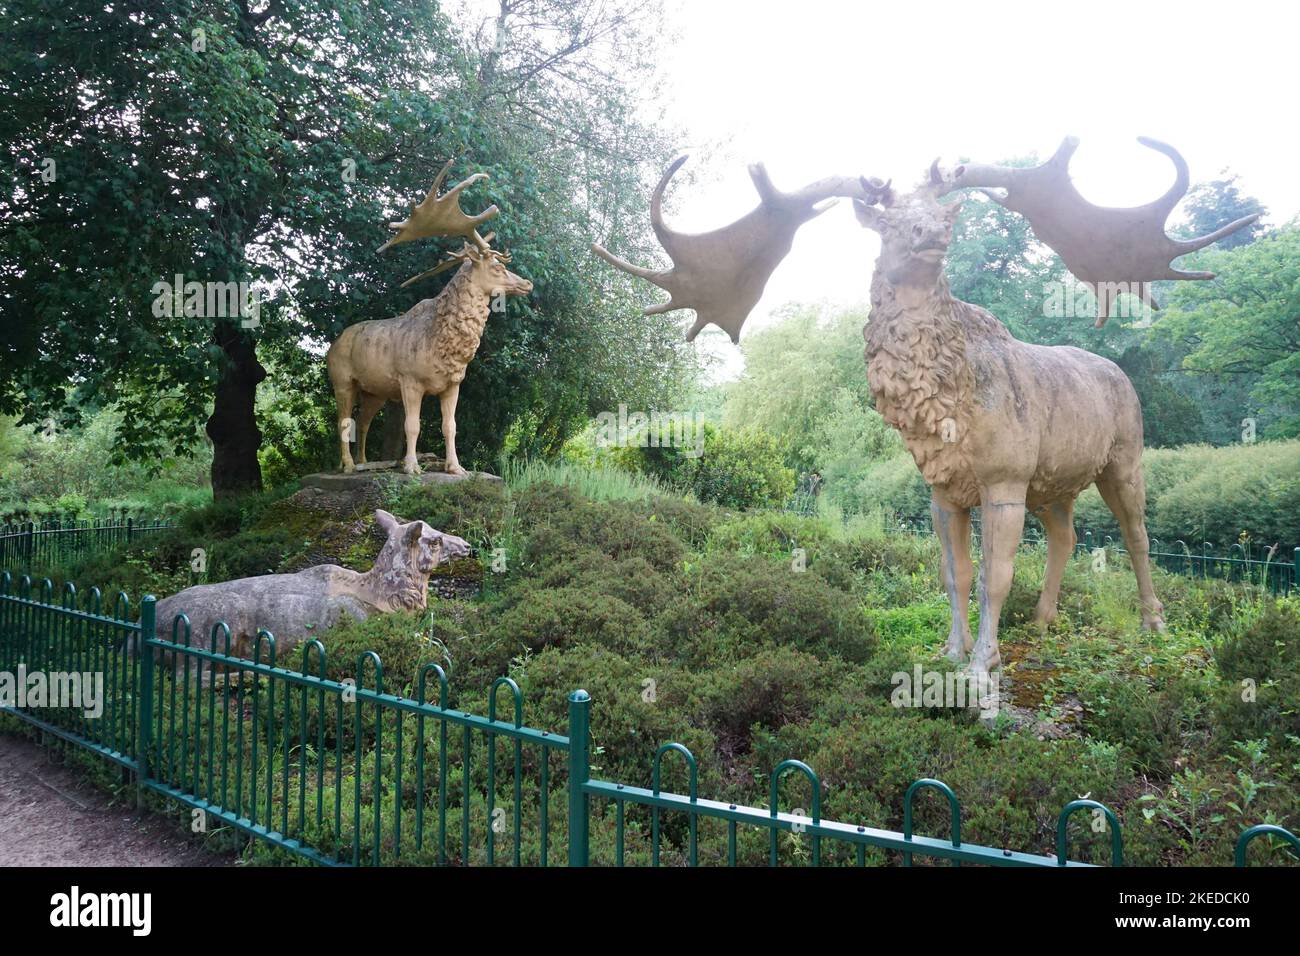 Sculptures of dinosaurs and other extinct animals at Crystal Palace in London, England, U.K Stock Photo